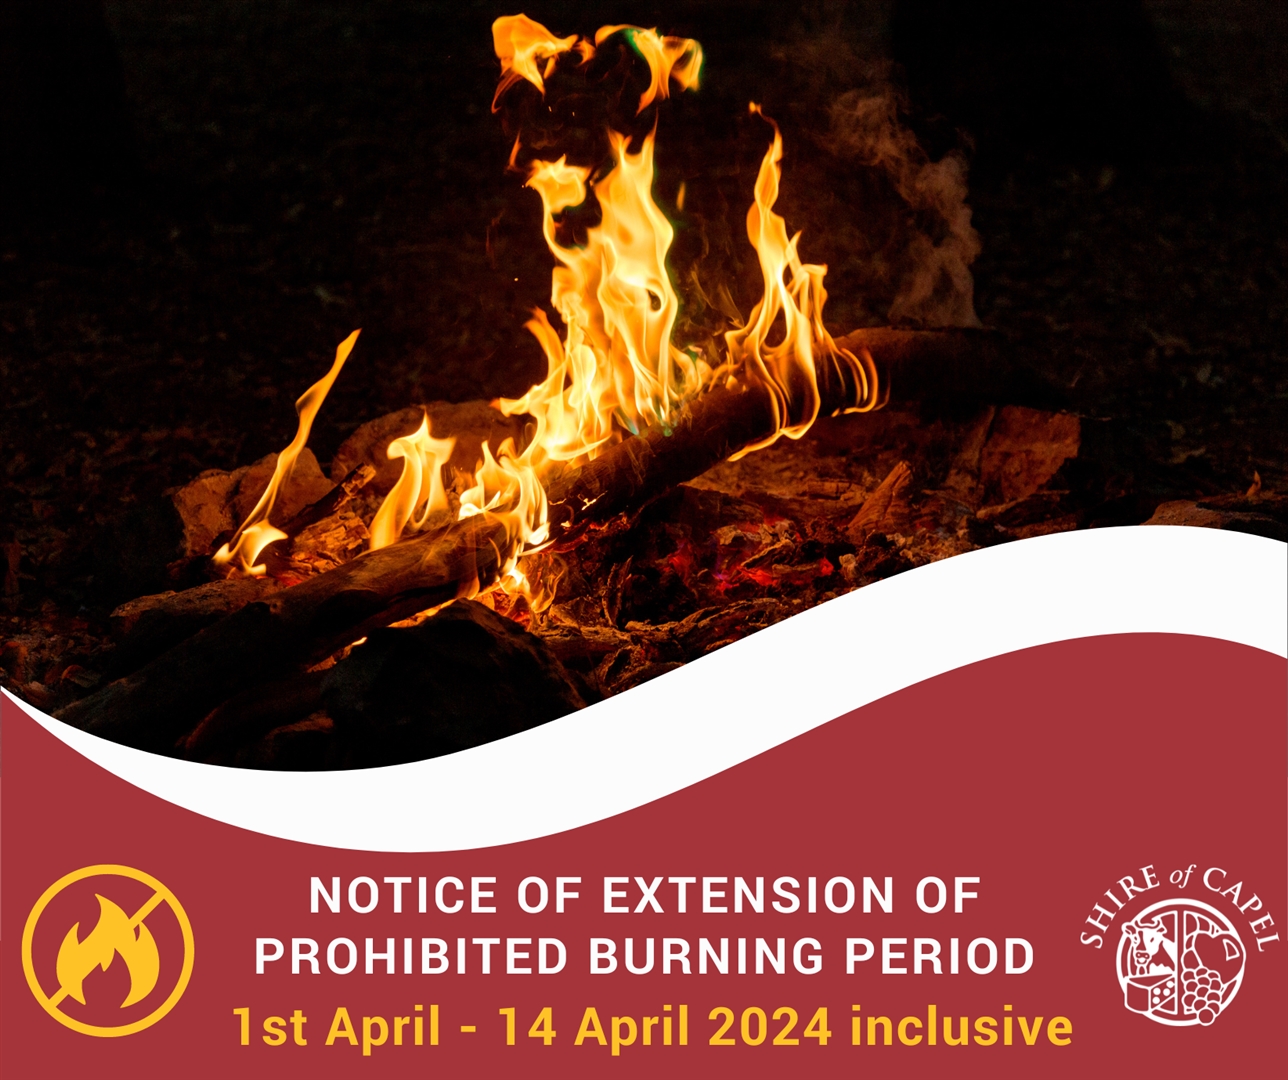 Copy of Notice of Extension of Prohibited Burning Period (2)